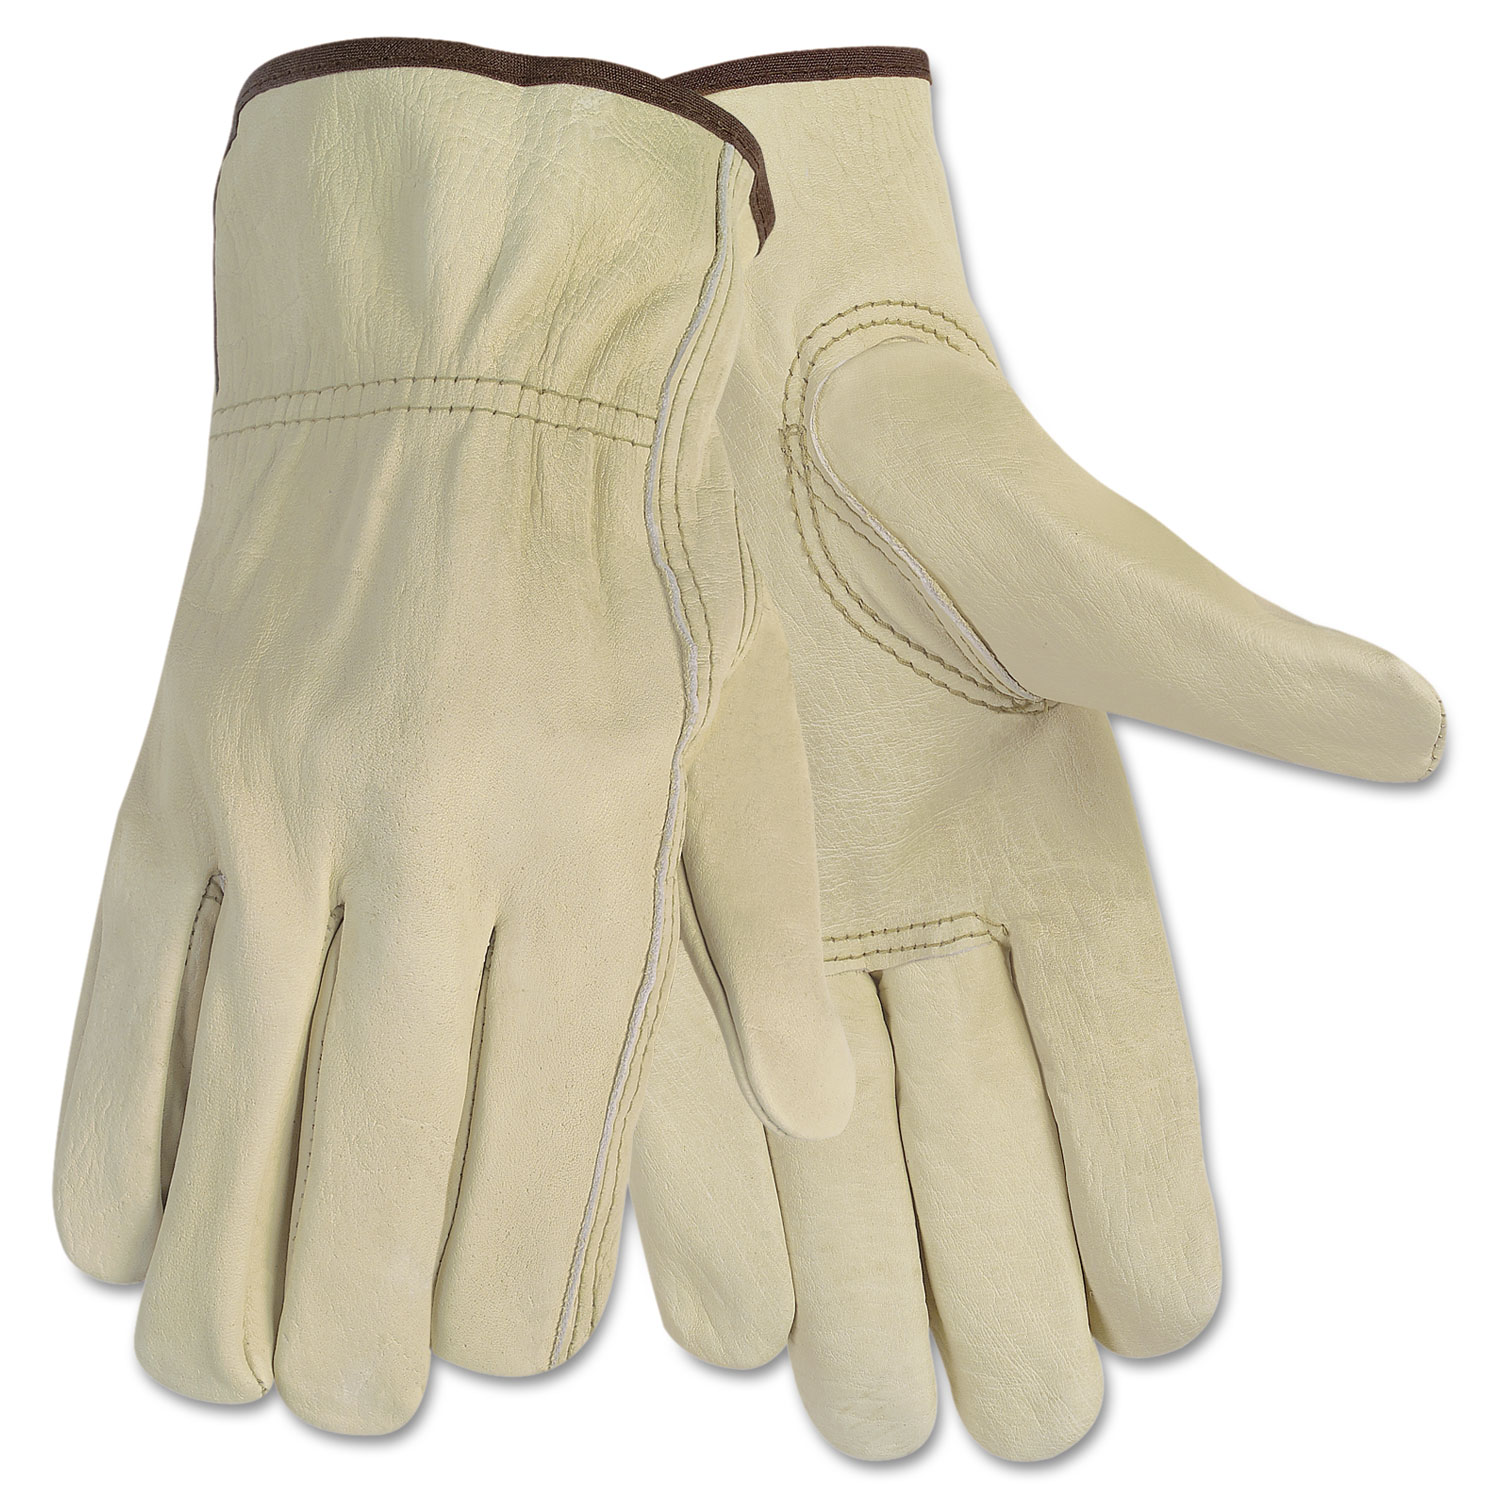  MCR Safety 3215L Economy Leather Driver Gloves, Large, Beige, Pair (CRW3215L) 